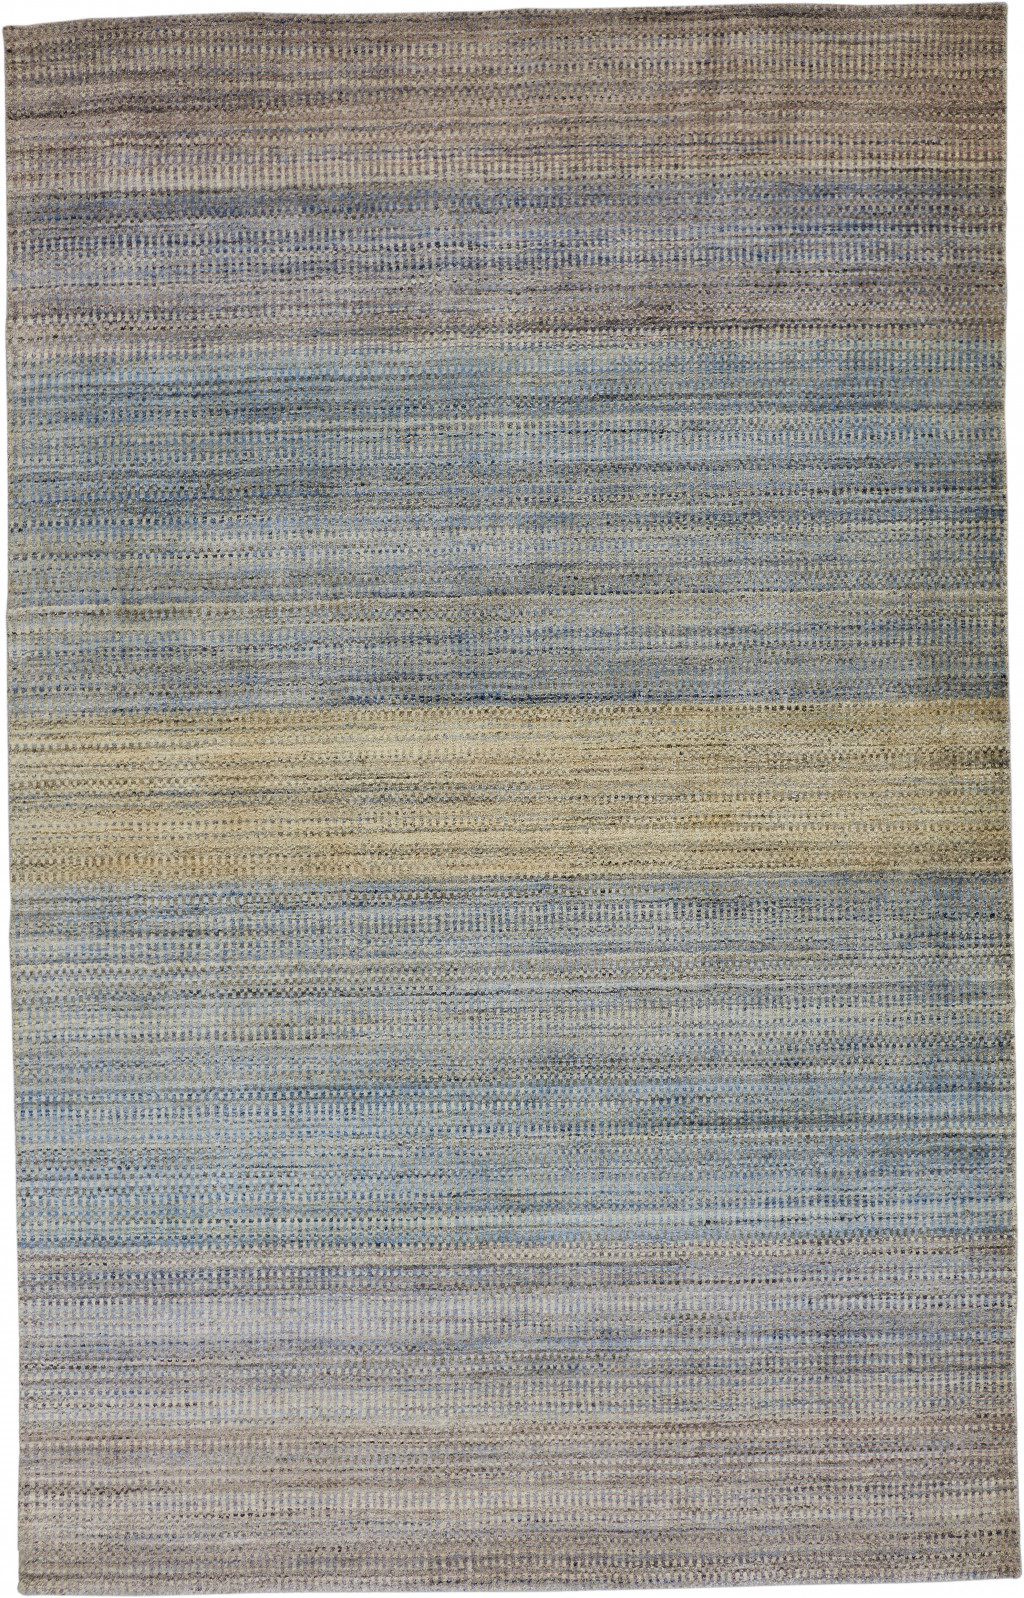 2' X 3' Blue Purple And Tan Ombre Hand Woven Area Rug-511749-1